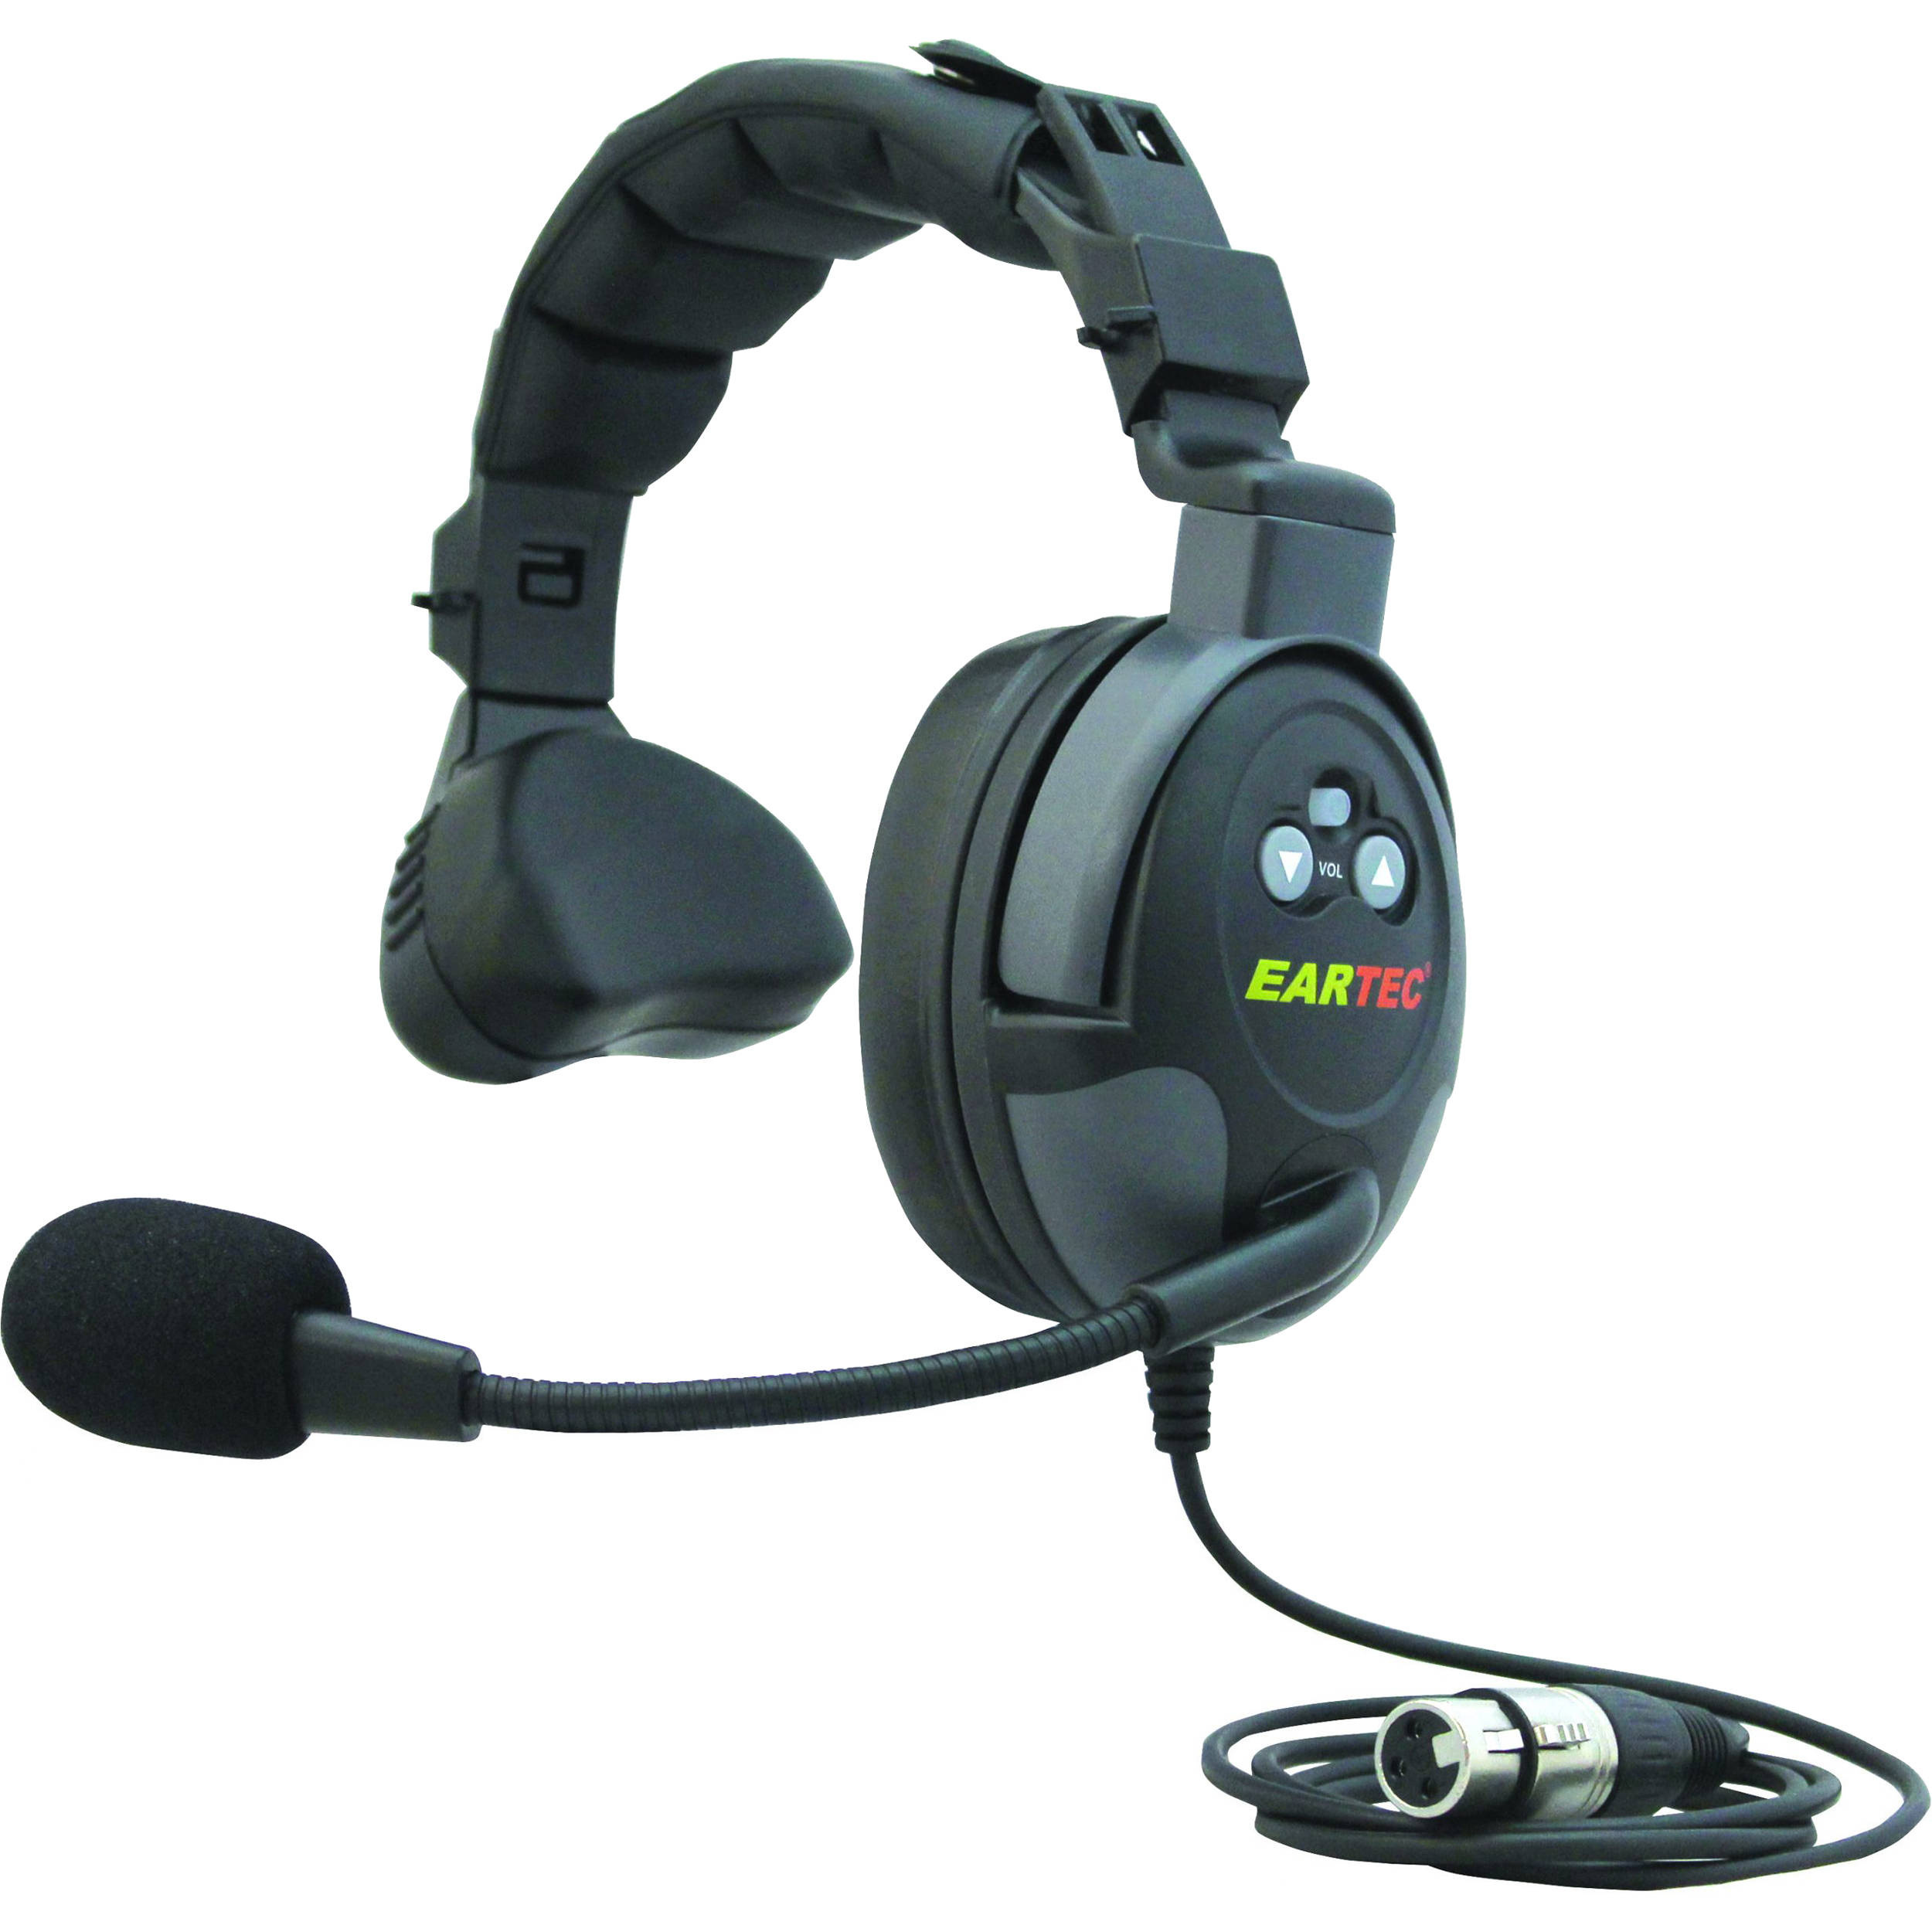 Eartec ProLine Single-Ear Wired Headset with Auto-Mute Microphone